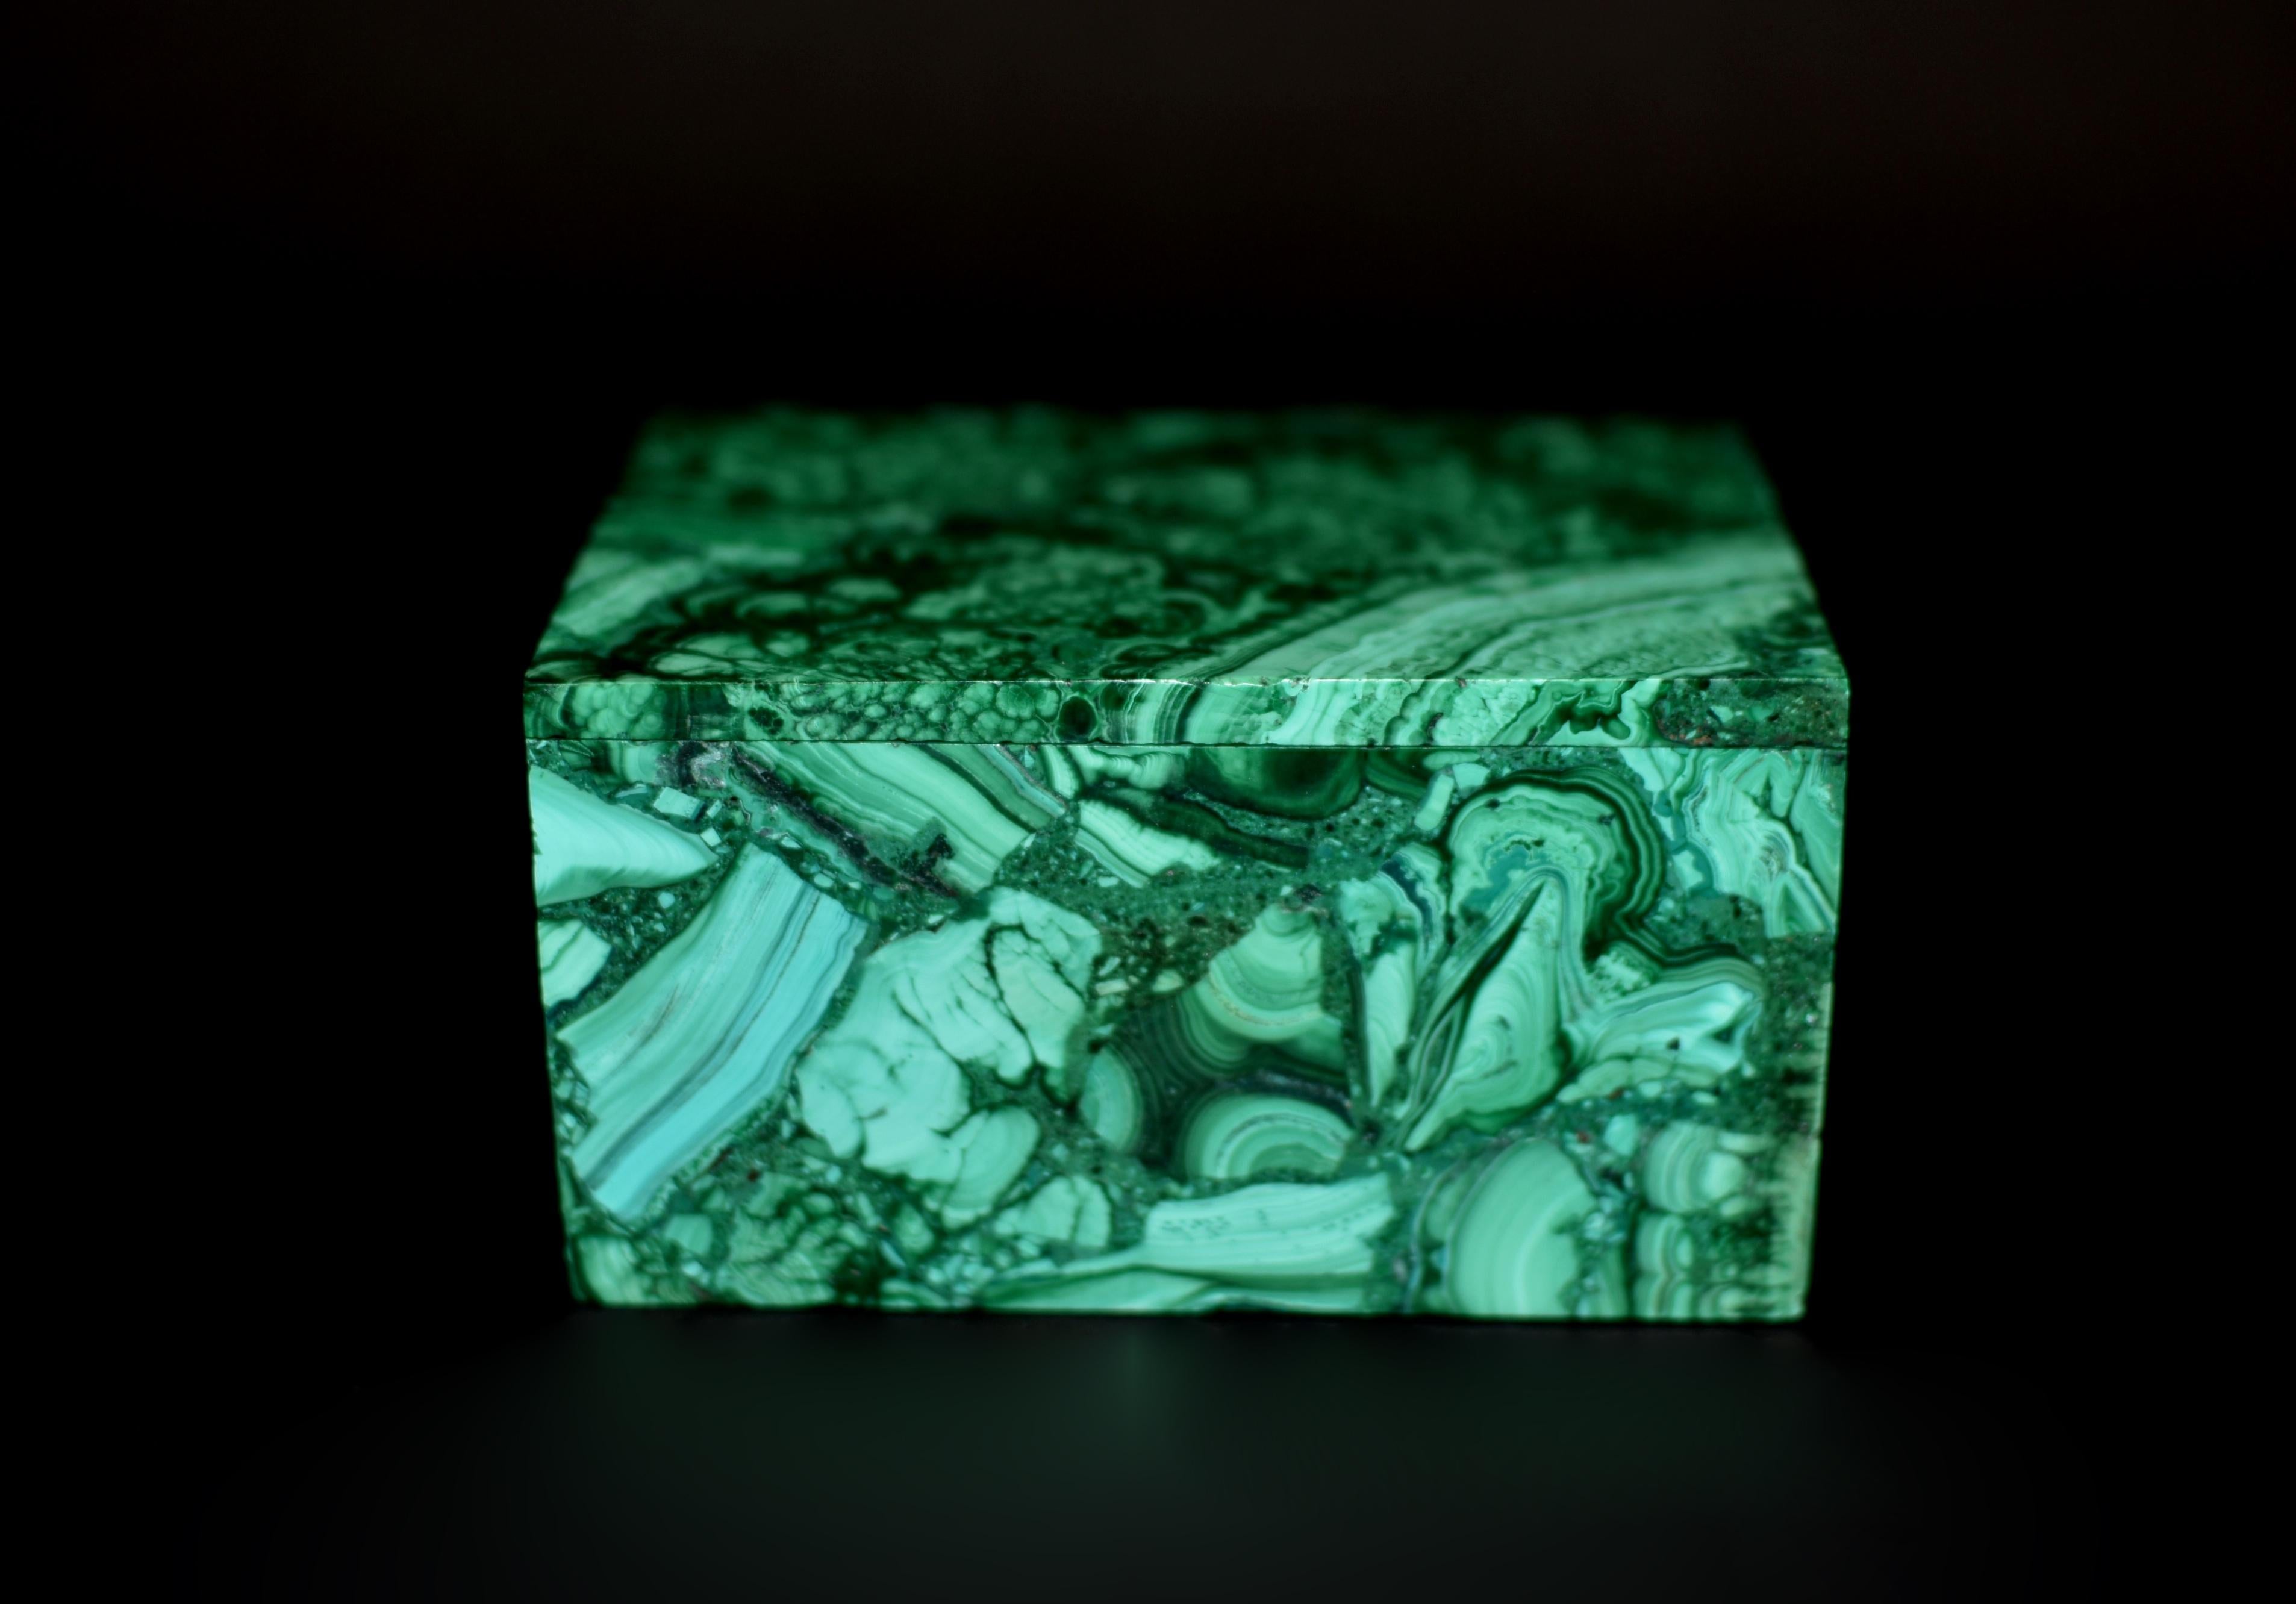 A beautiful 1.2 lb malachite box. The box is made of gemstone malachite with spectacular natural swirls and patterns. A remarkable objet d'art of quality, luxury and sophistication. Meticulously hand crafted and polished to a lustrous shine. A stone